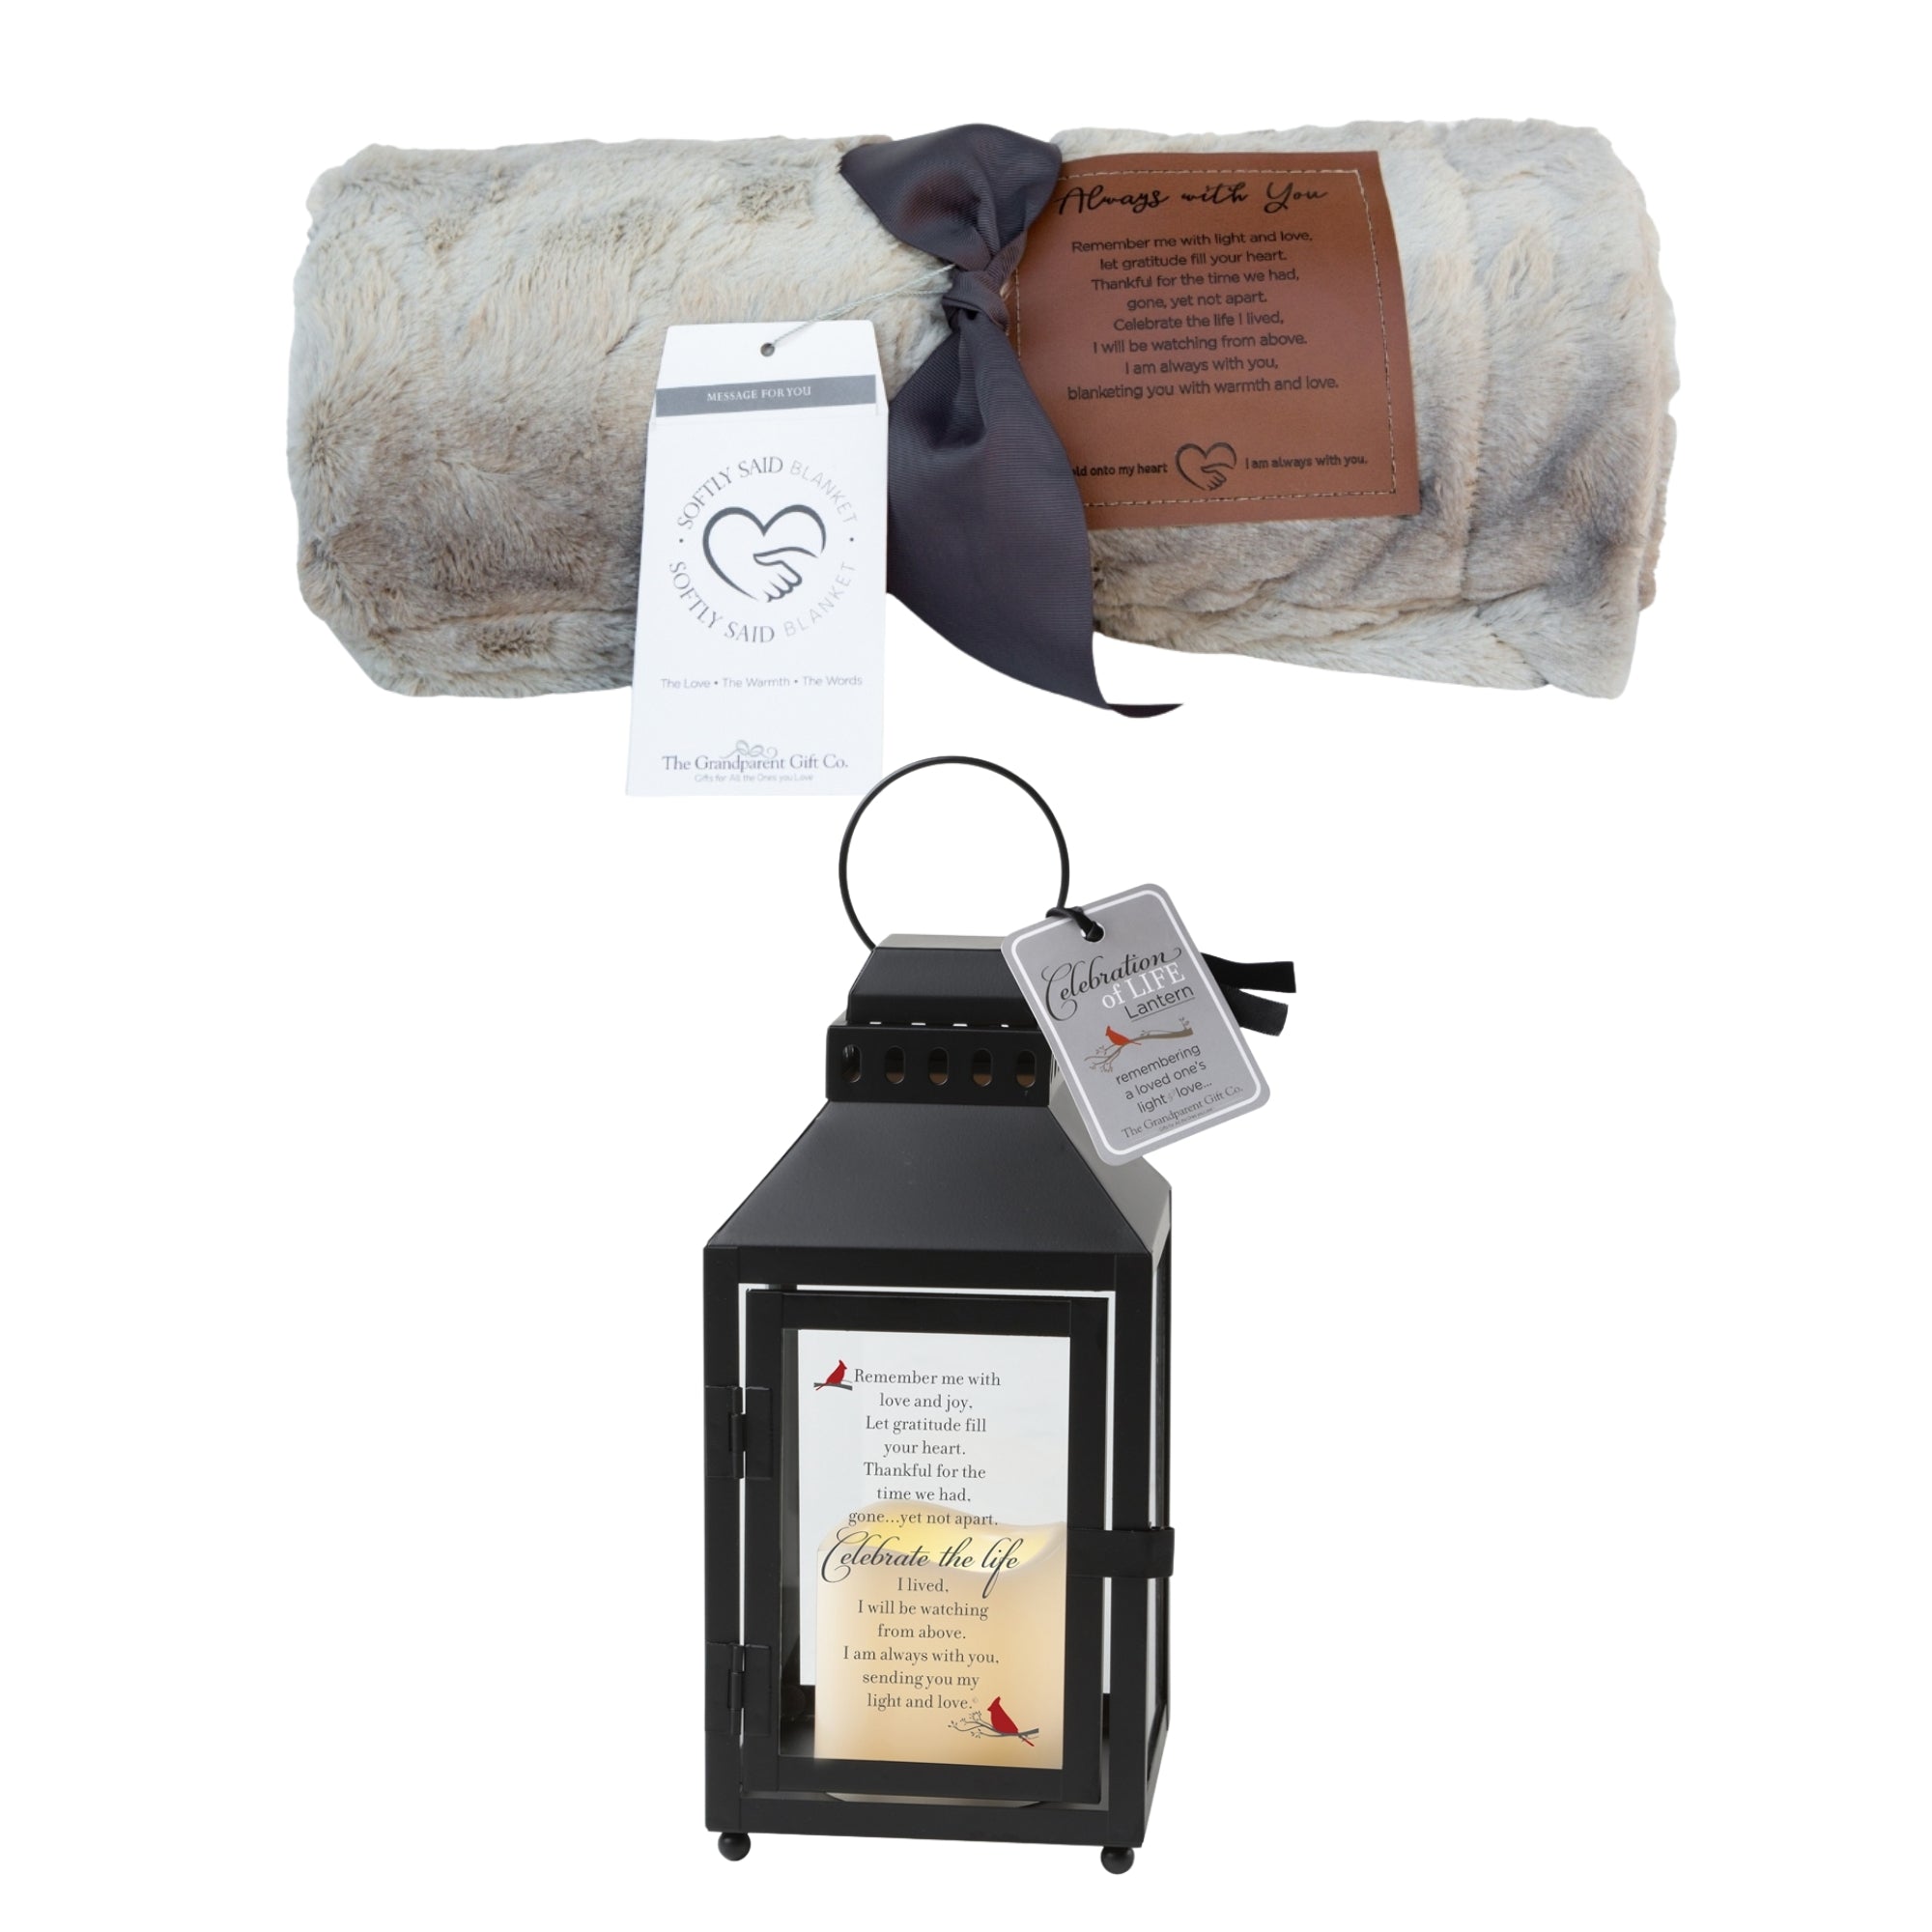 Celebration of Life Gift set with lantern and Always with You blanket.